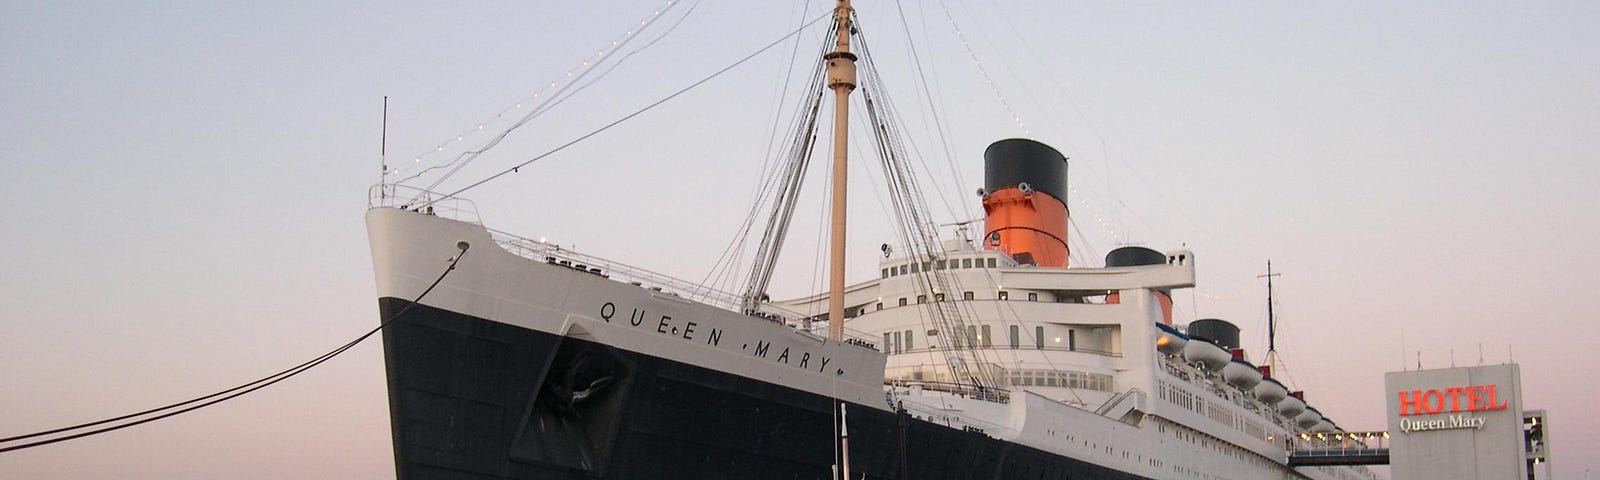 Queen Mary, Long Beach and a Russian submarine